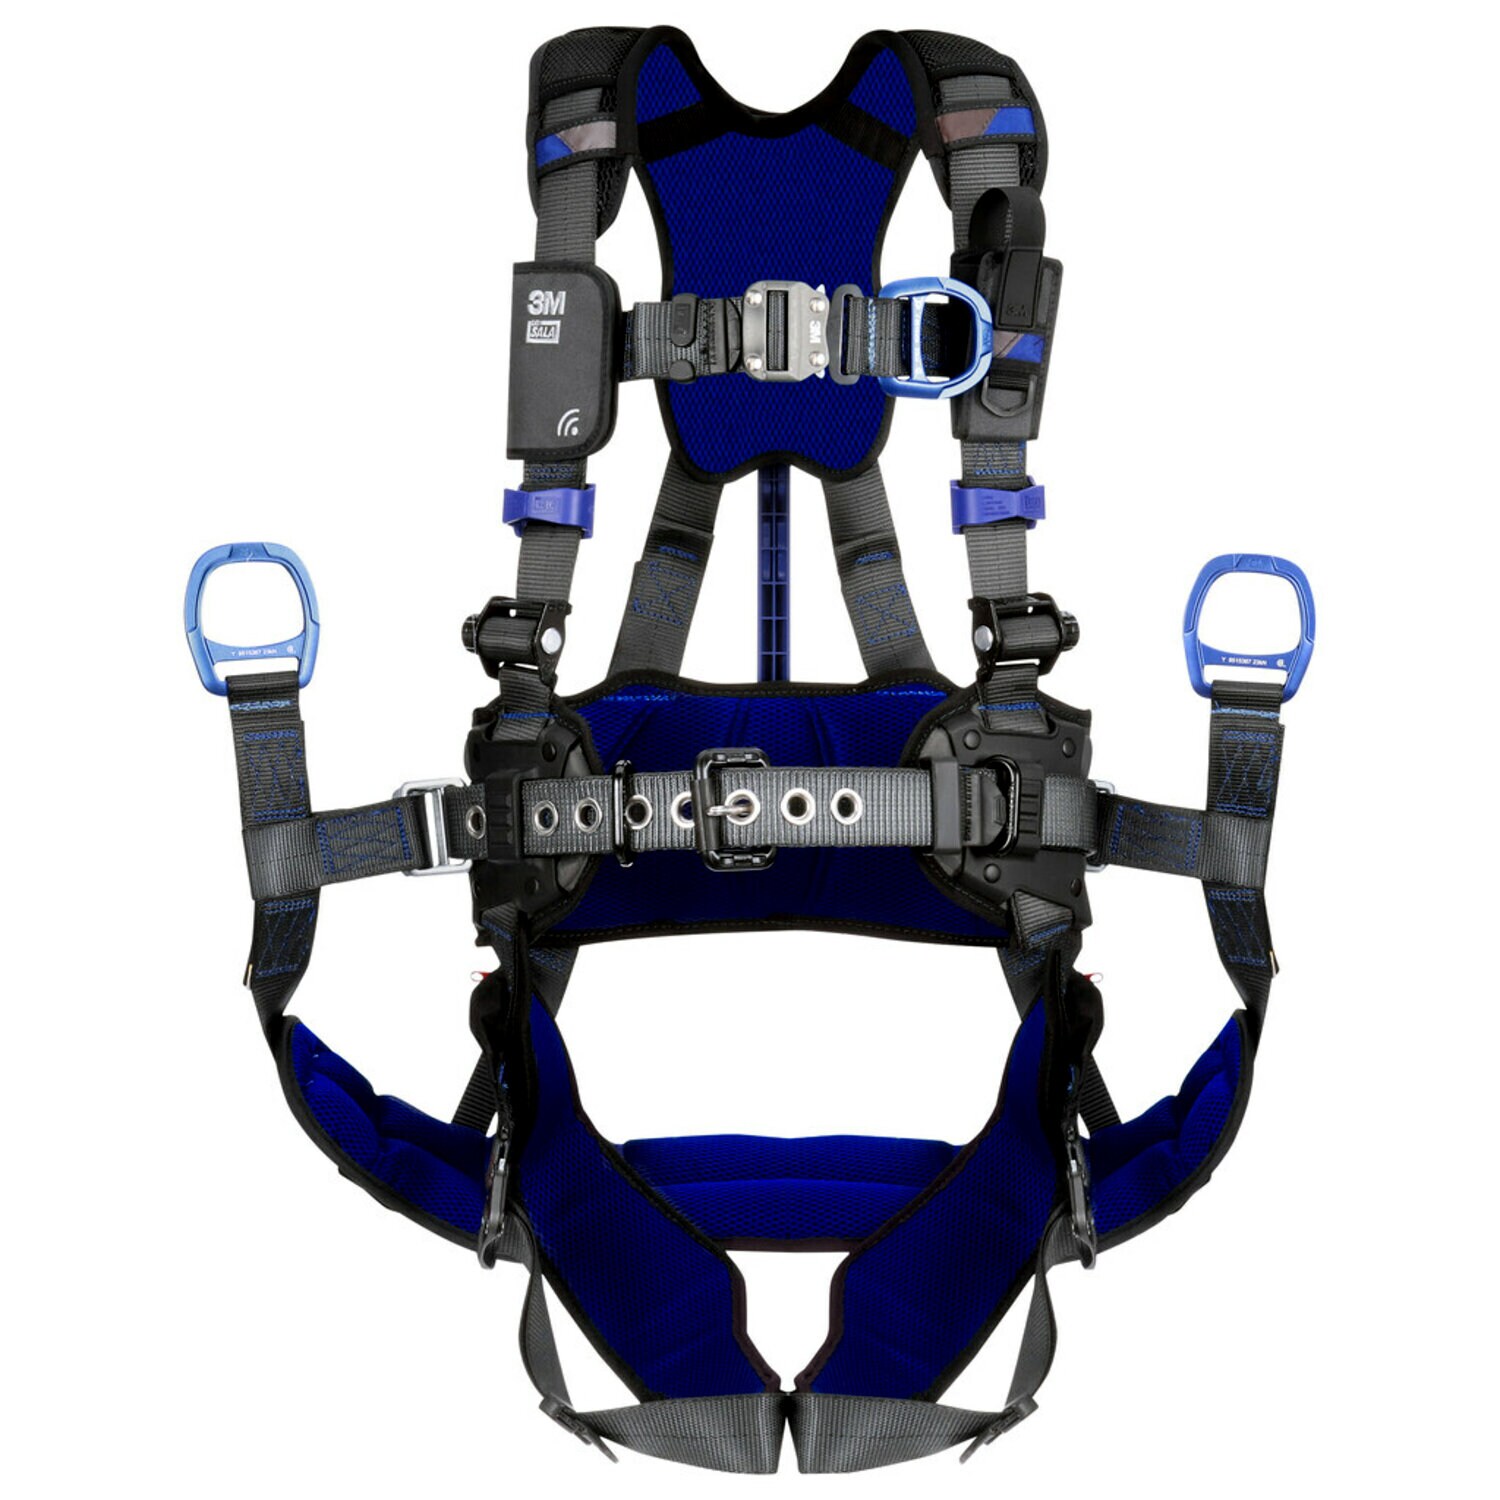 7012818057 - 3M DBI-SALA ExoFit X300 Comfort Tower Climbing/Suspension Safety Harness with Weight Bar 1403234, Large